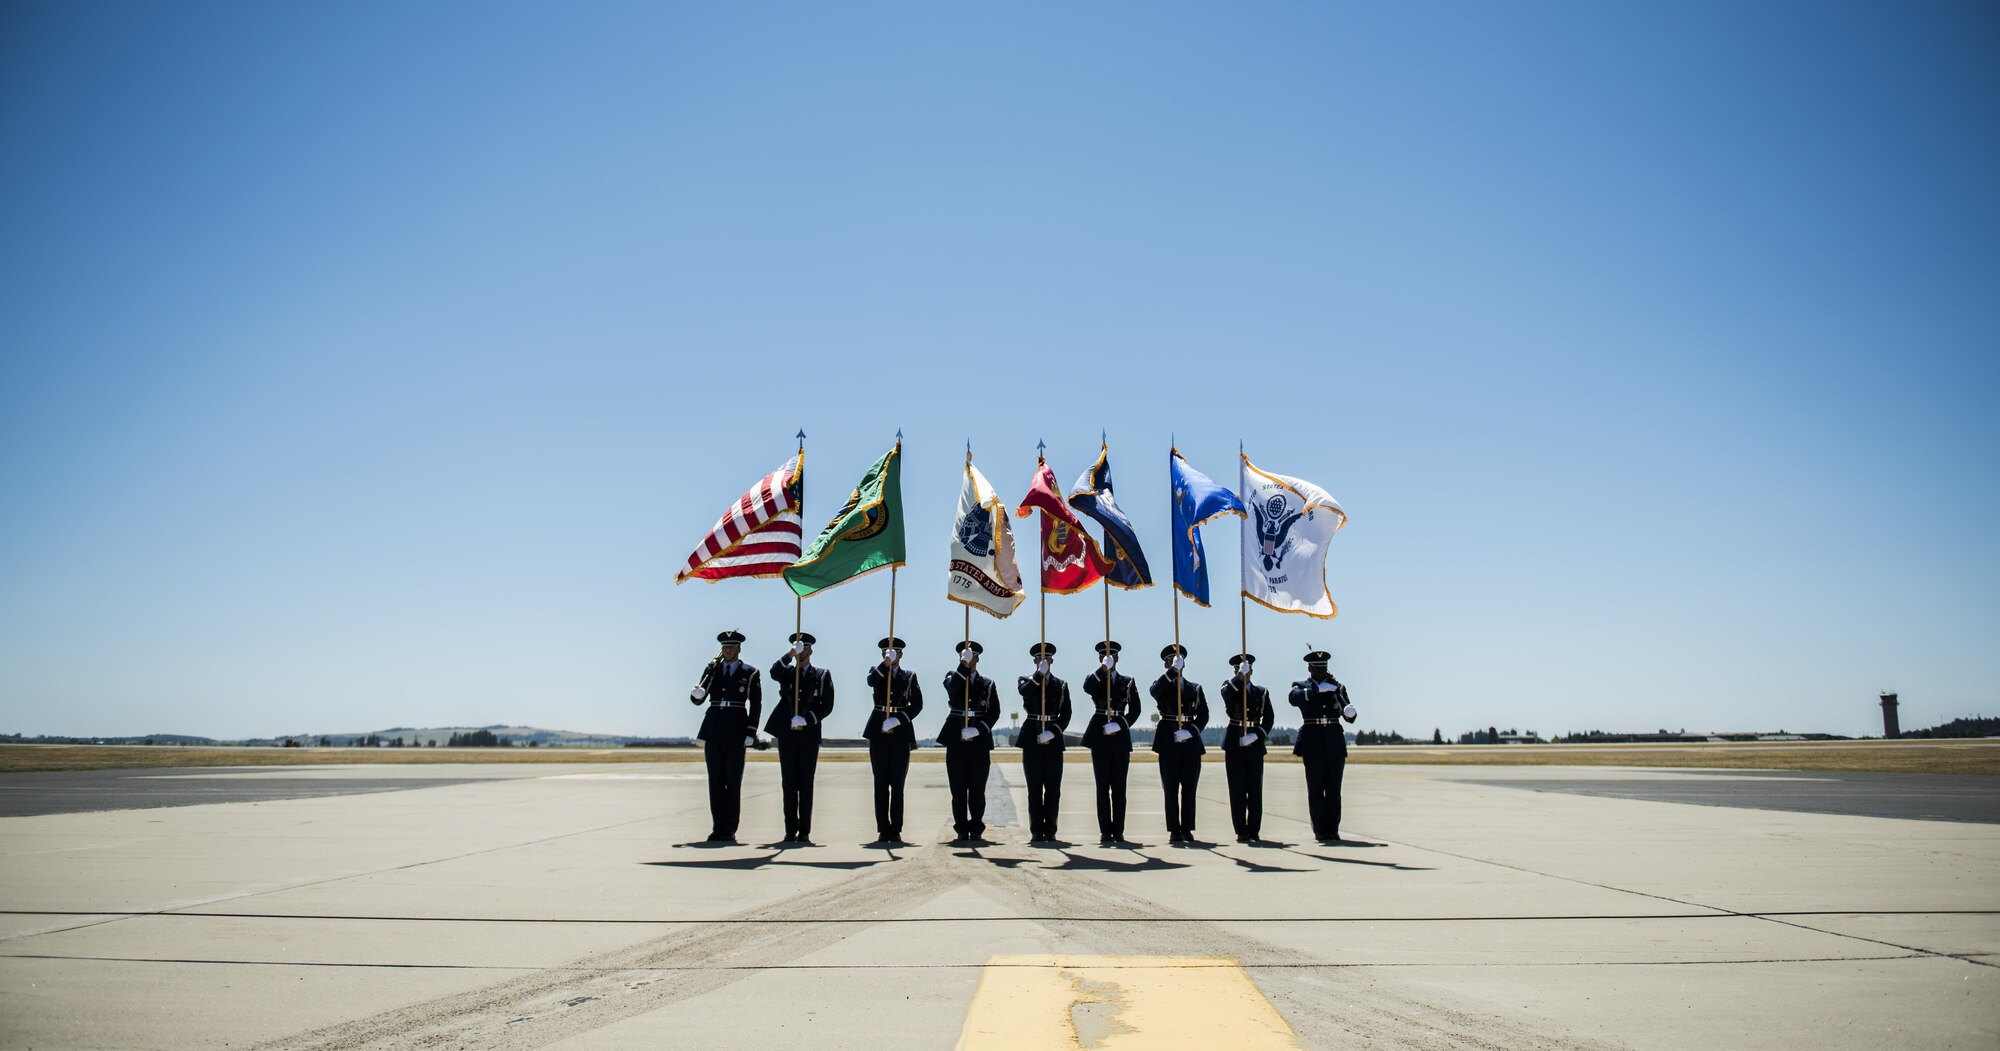 The Fairchild Air Force Base Honor Guard presents opening colors at Skyfest 2017 Air Show and Open House July 28, 2017, at Fairchild Air Force Base, Washington. Fairchild’s honor guardsmen perform numerous types of ceremonies, to include two-man and six-man flag folding sequences, colors presentation, colors posting and marching in parades. (U.S. Air Force photo/ Senior Airman Sean Campbell)  